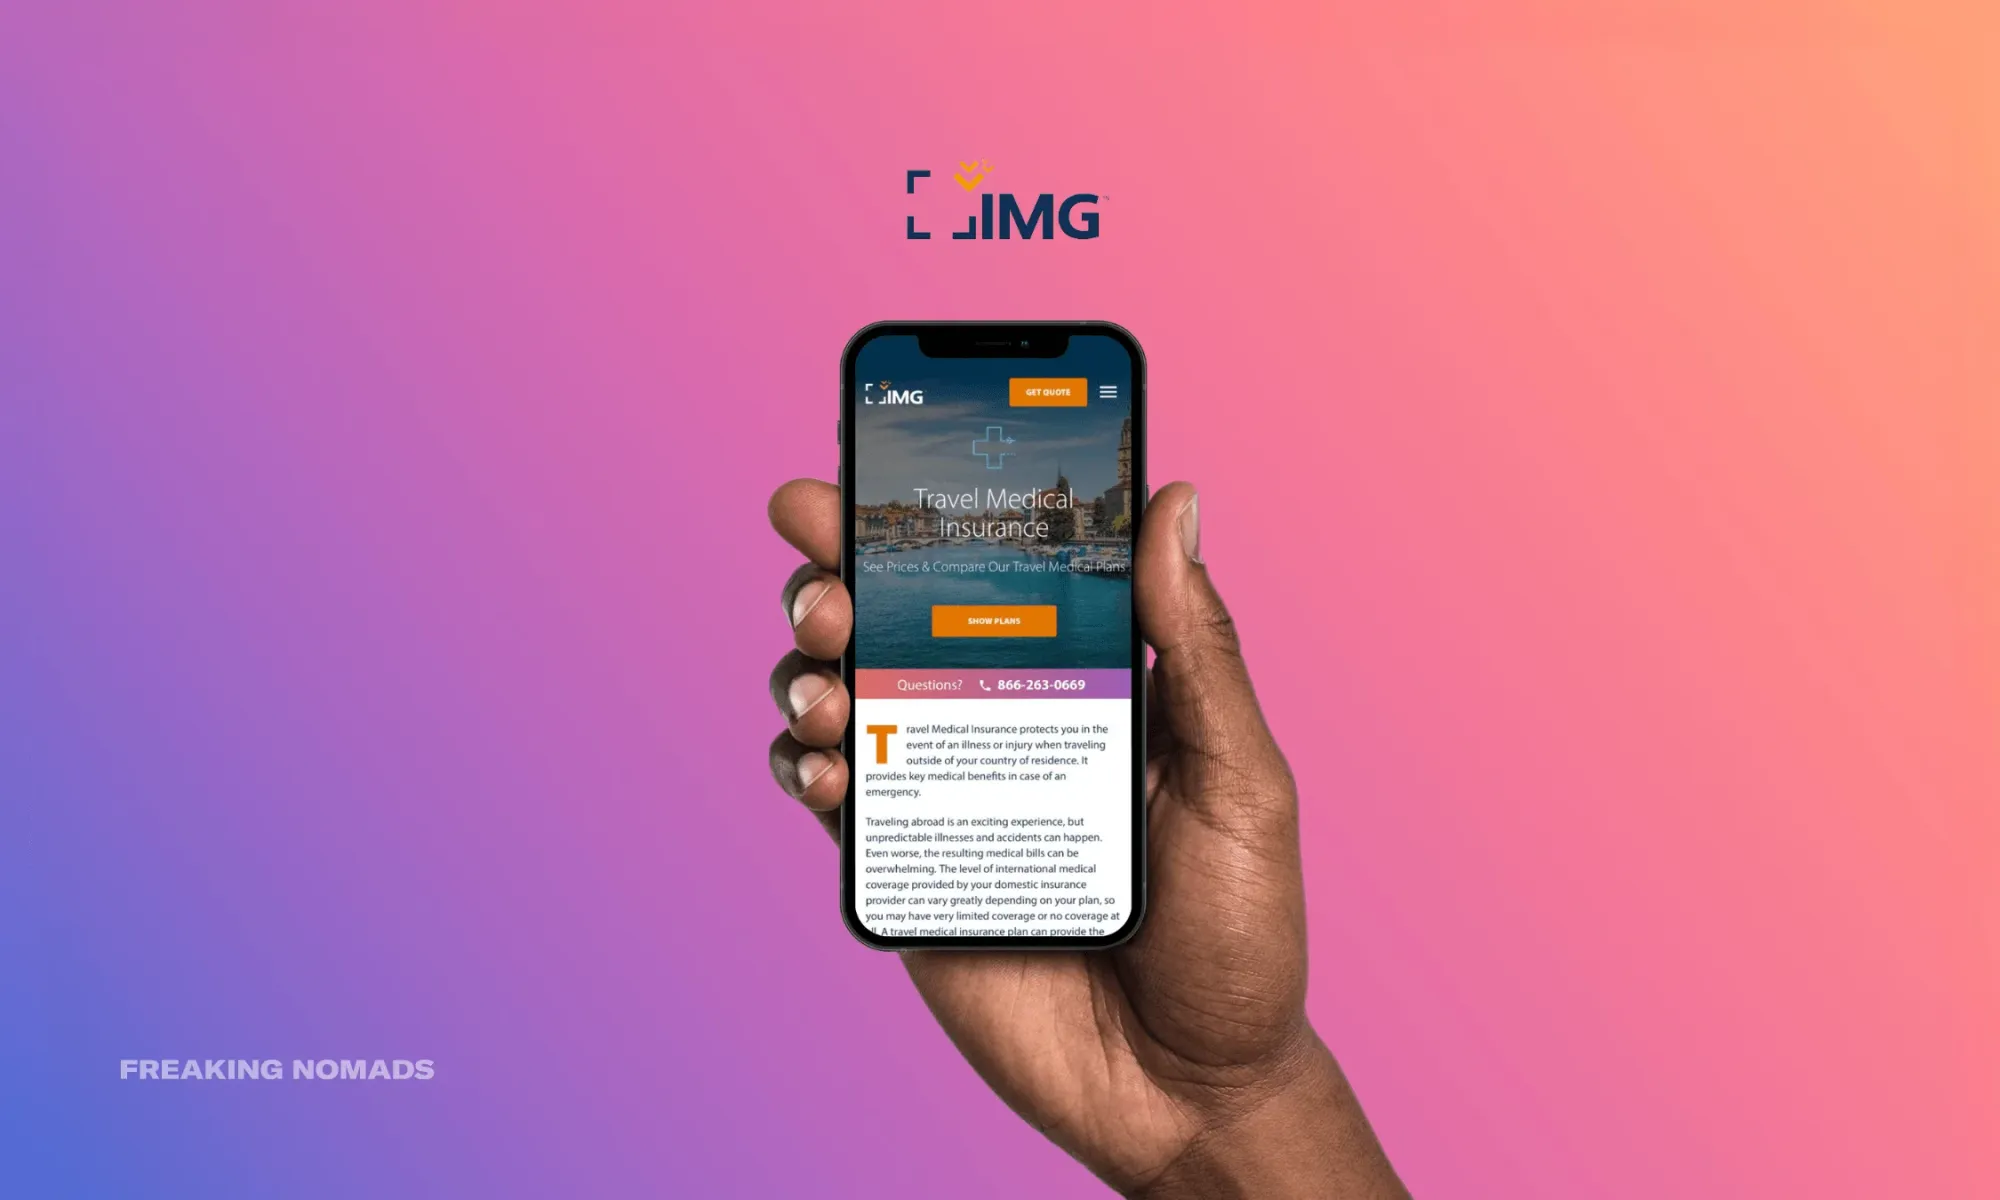 IMG Travel Medical Insurance website on a phone held by a human hand